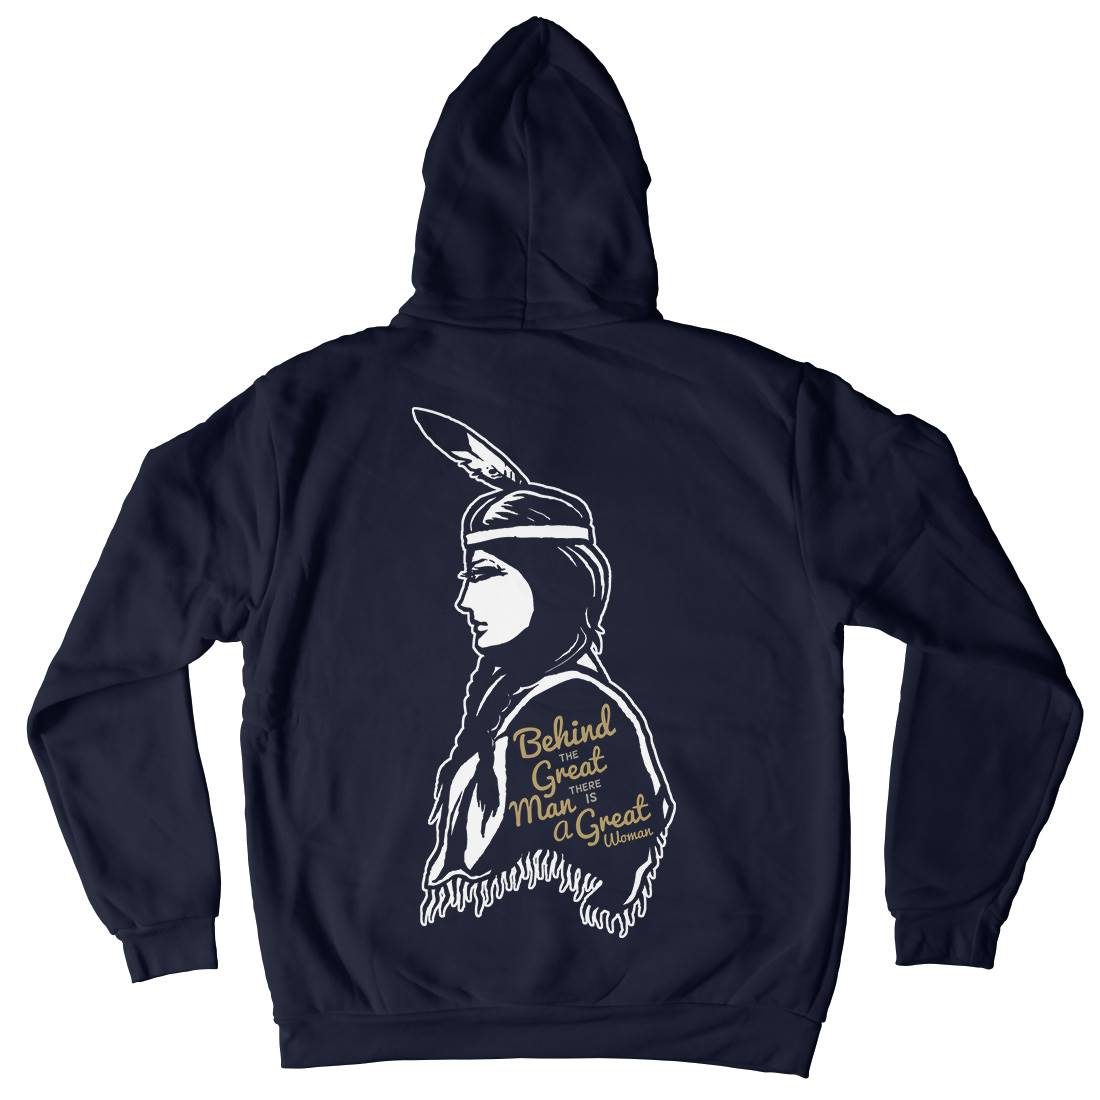 Great Woman Mens Hoodie With Pocket Quotes A324